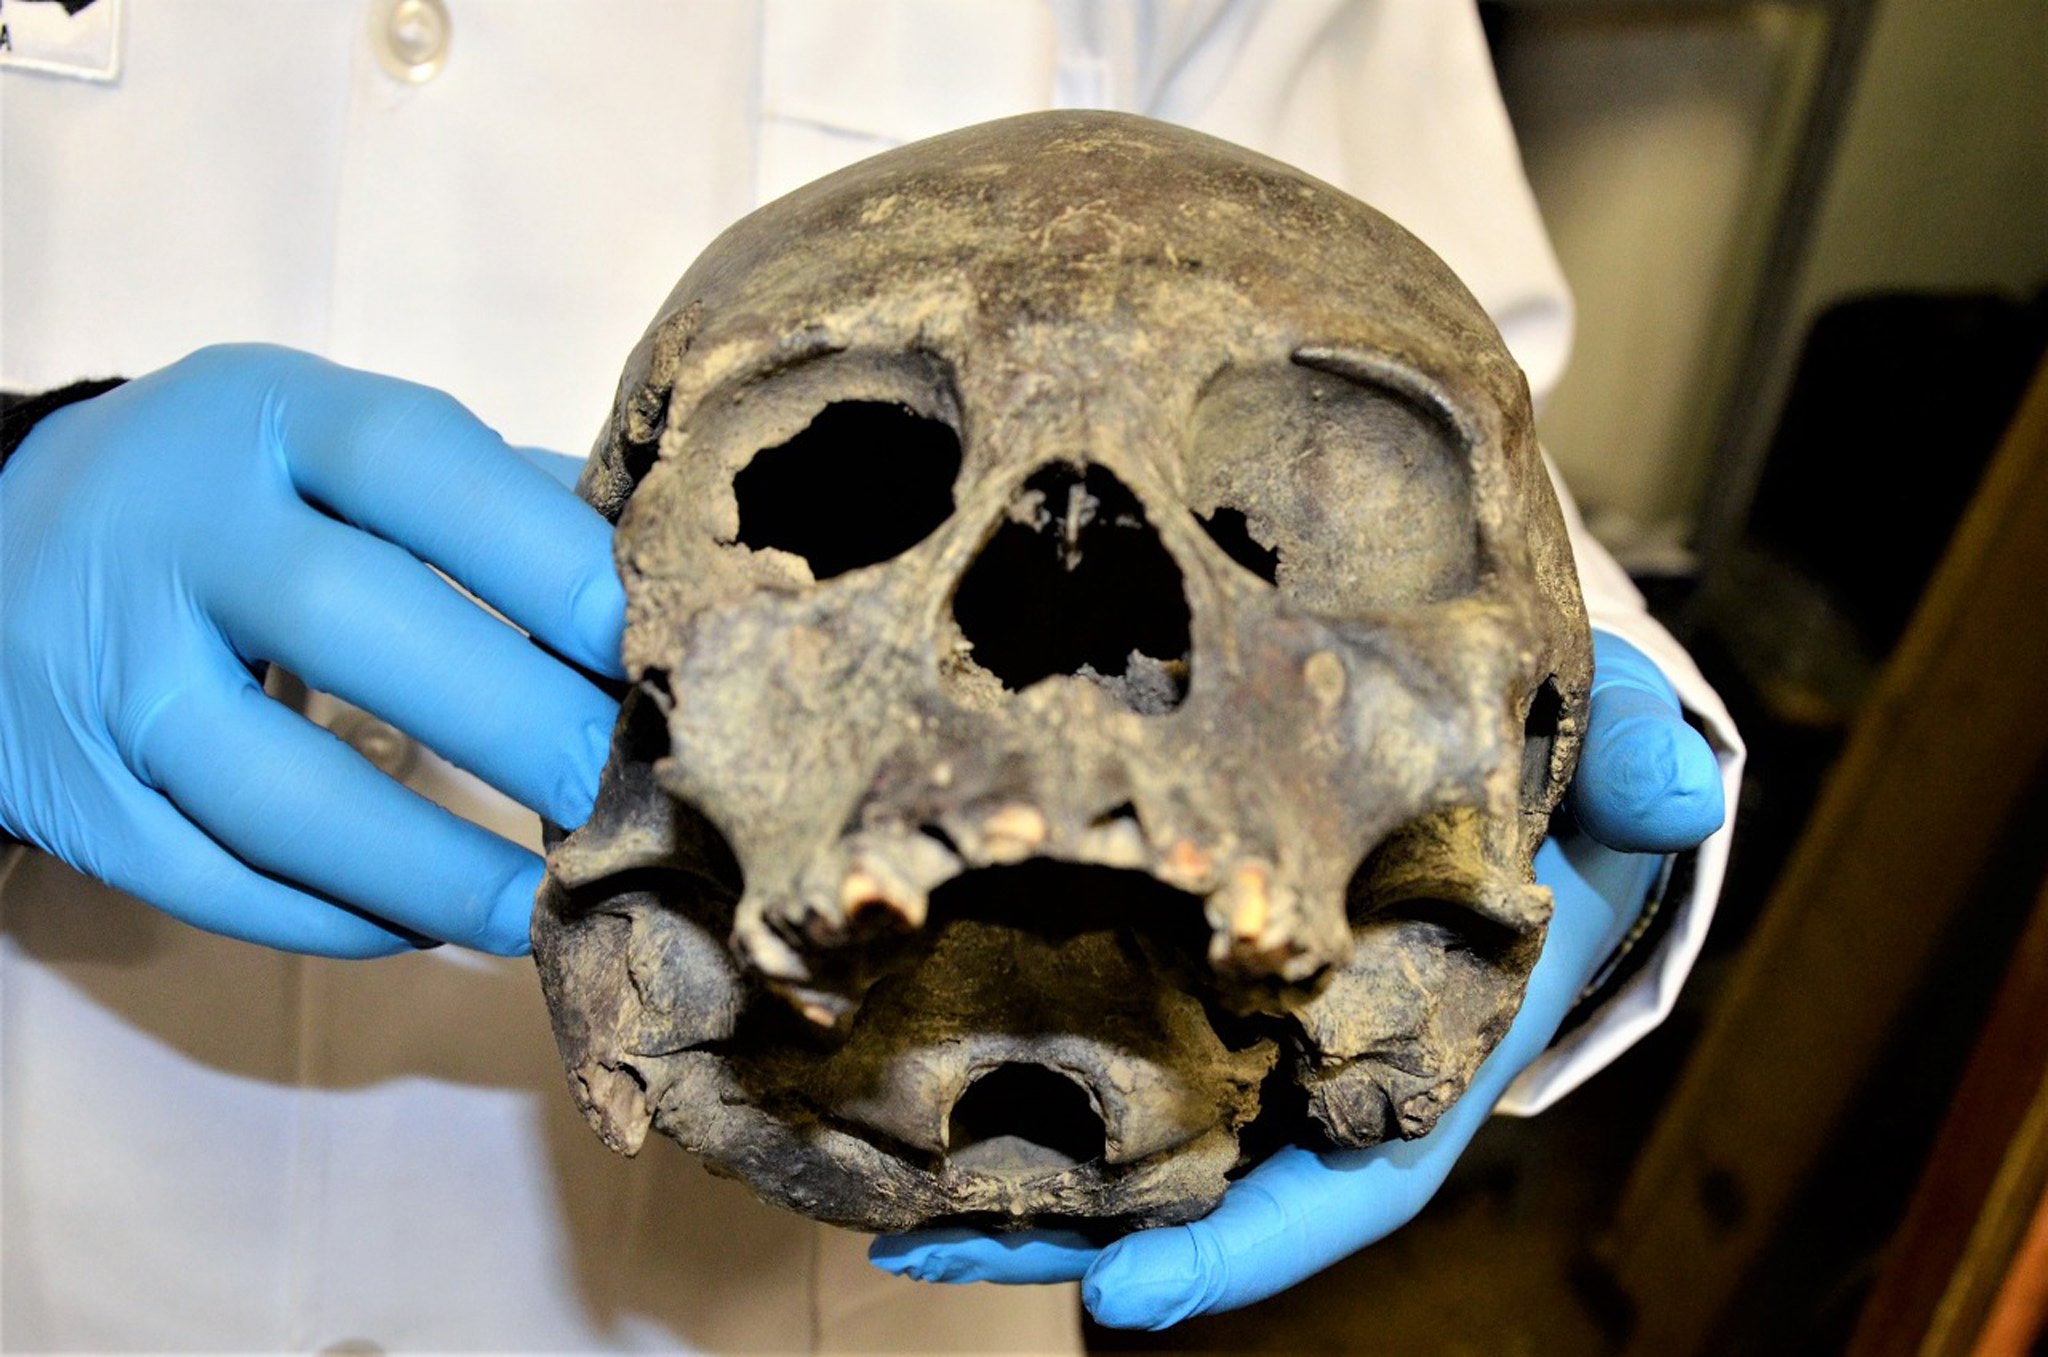 View of a human skull from the pre-Columbian Tiahuanaco culture at Bolivia's National Museum of Archaeology, in La Paz, Bolivia, April 8, 2018. EPA-EFE/BOLIVIAN CULTURES AND TOURISM MINISTRY